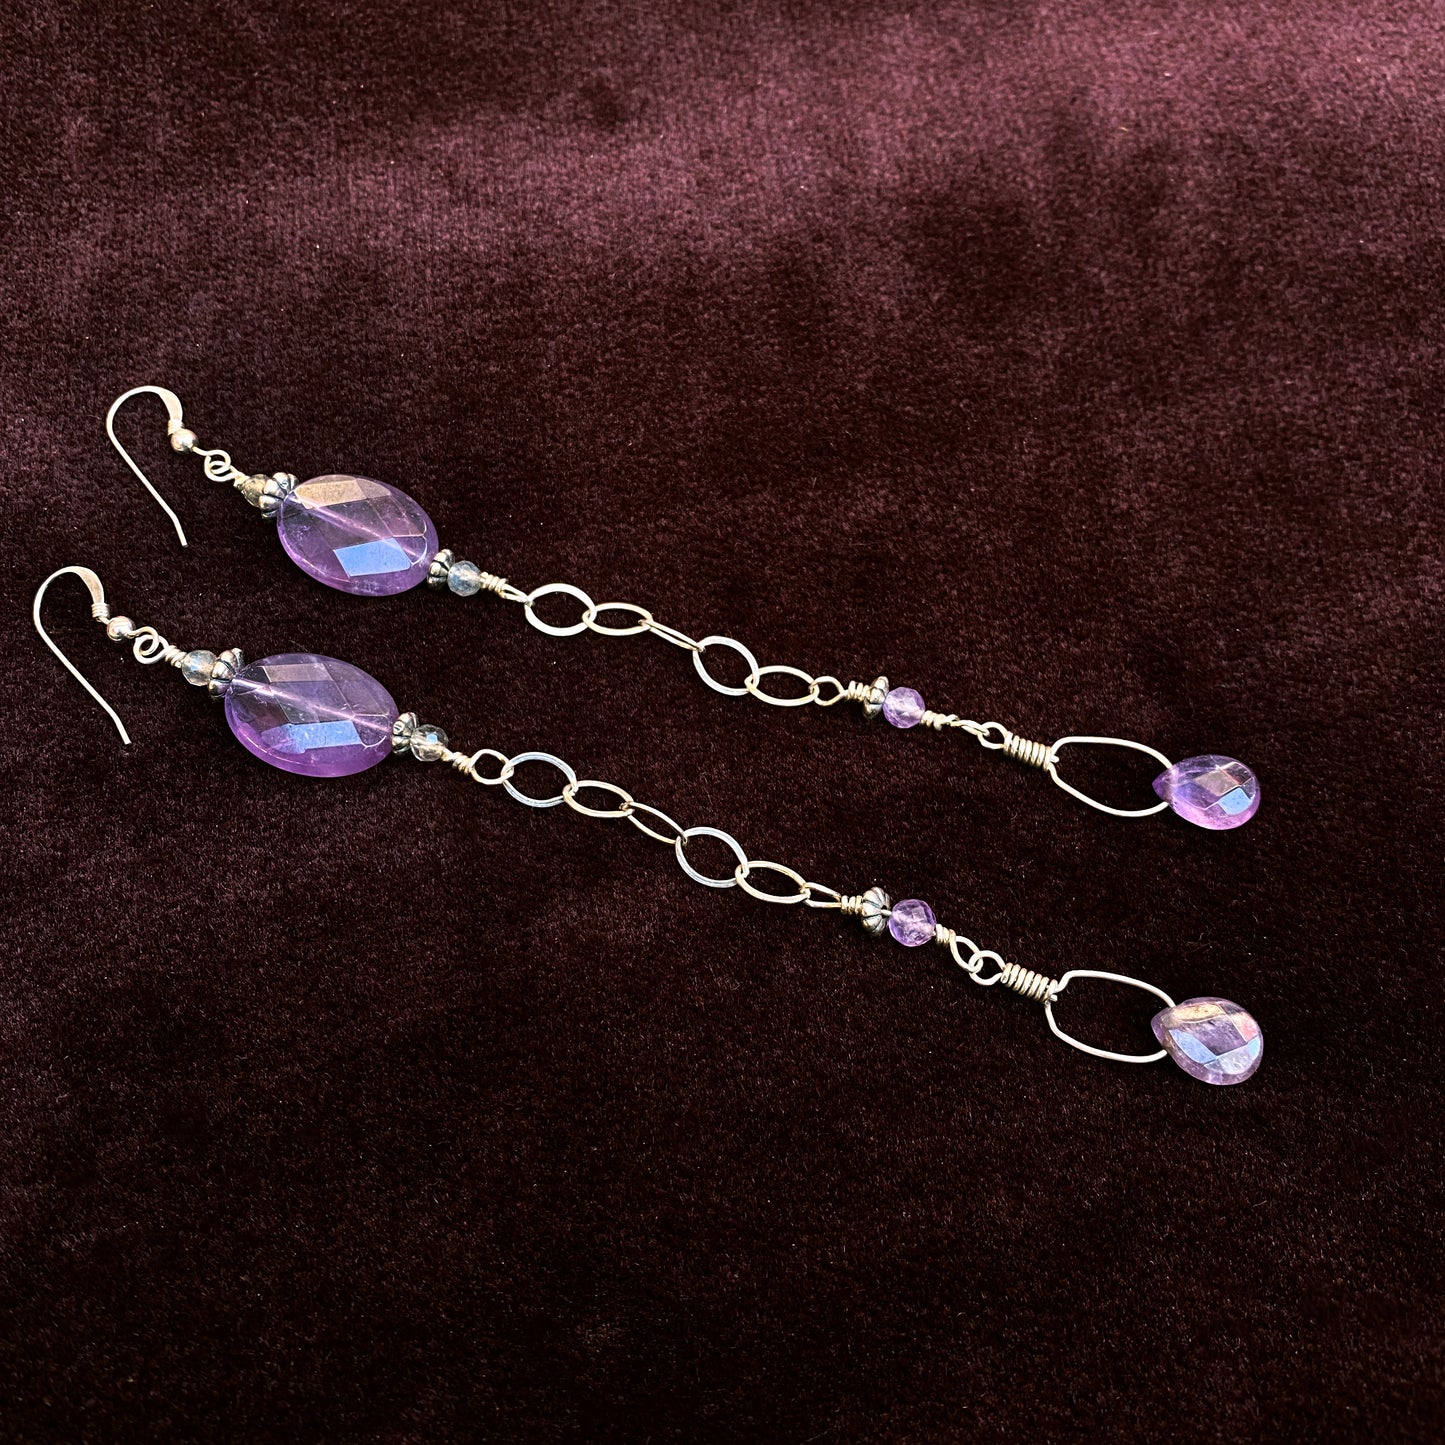 Amethyst and Labradorite Gemstones with Sterling Silver Earrings